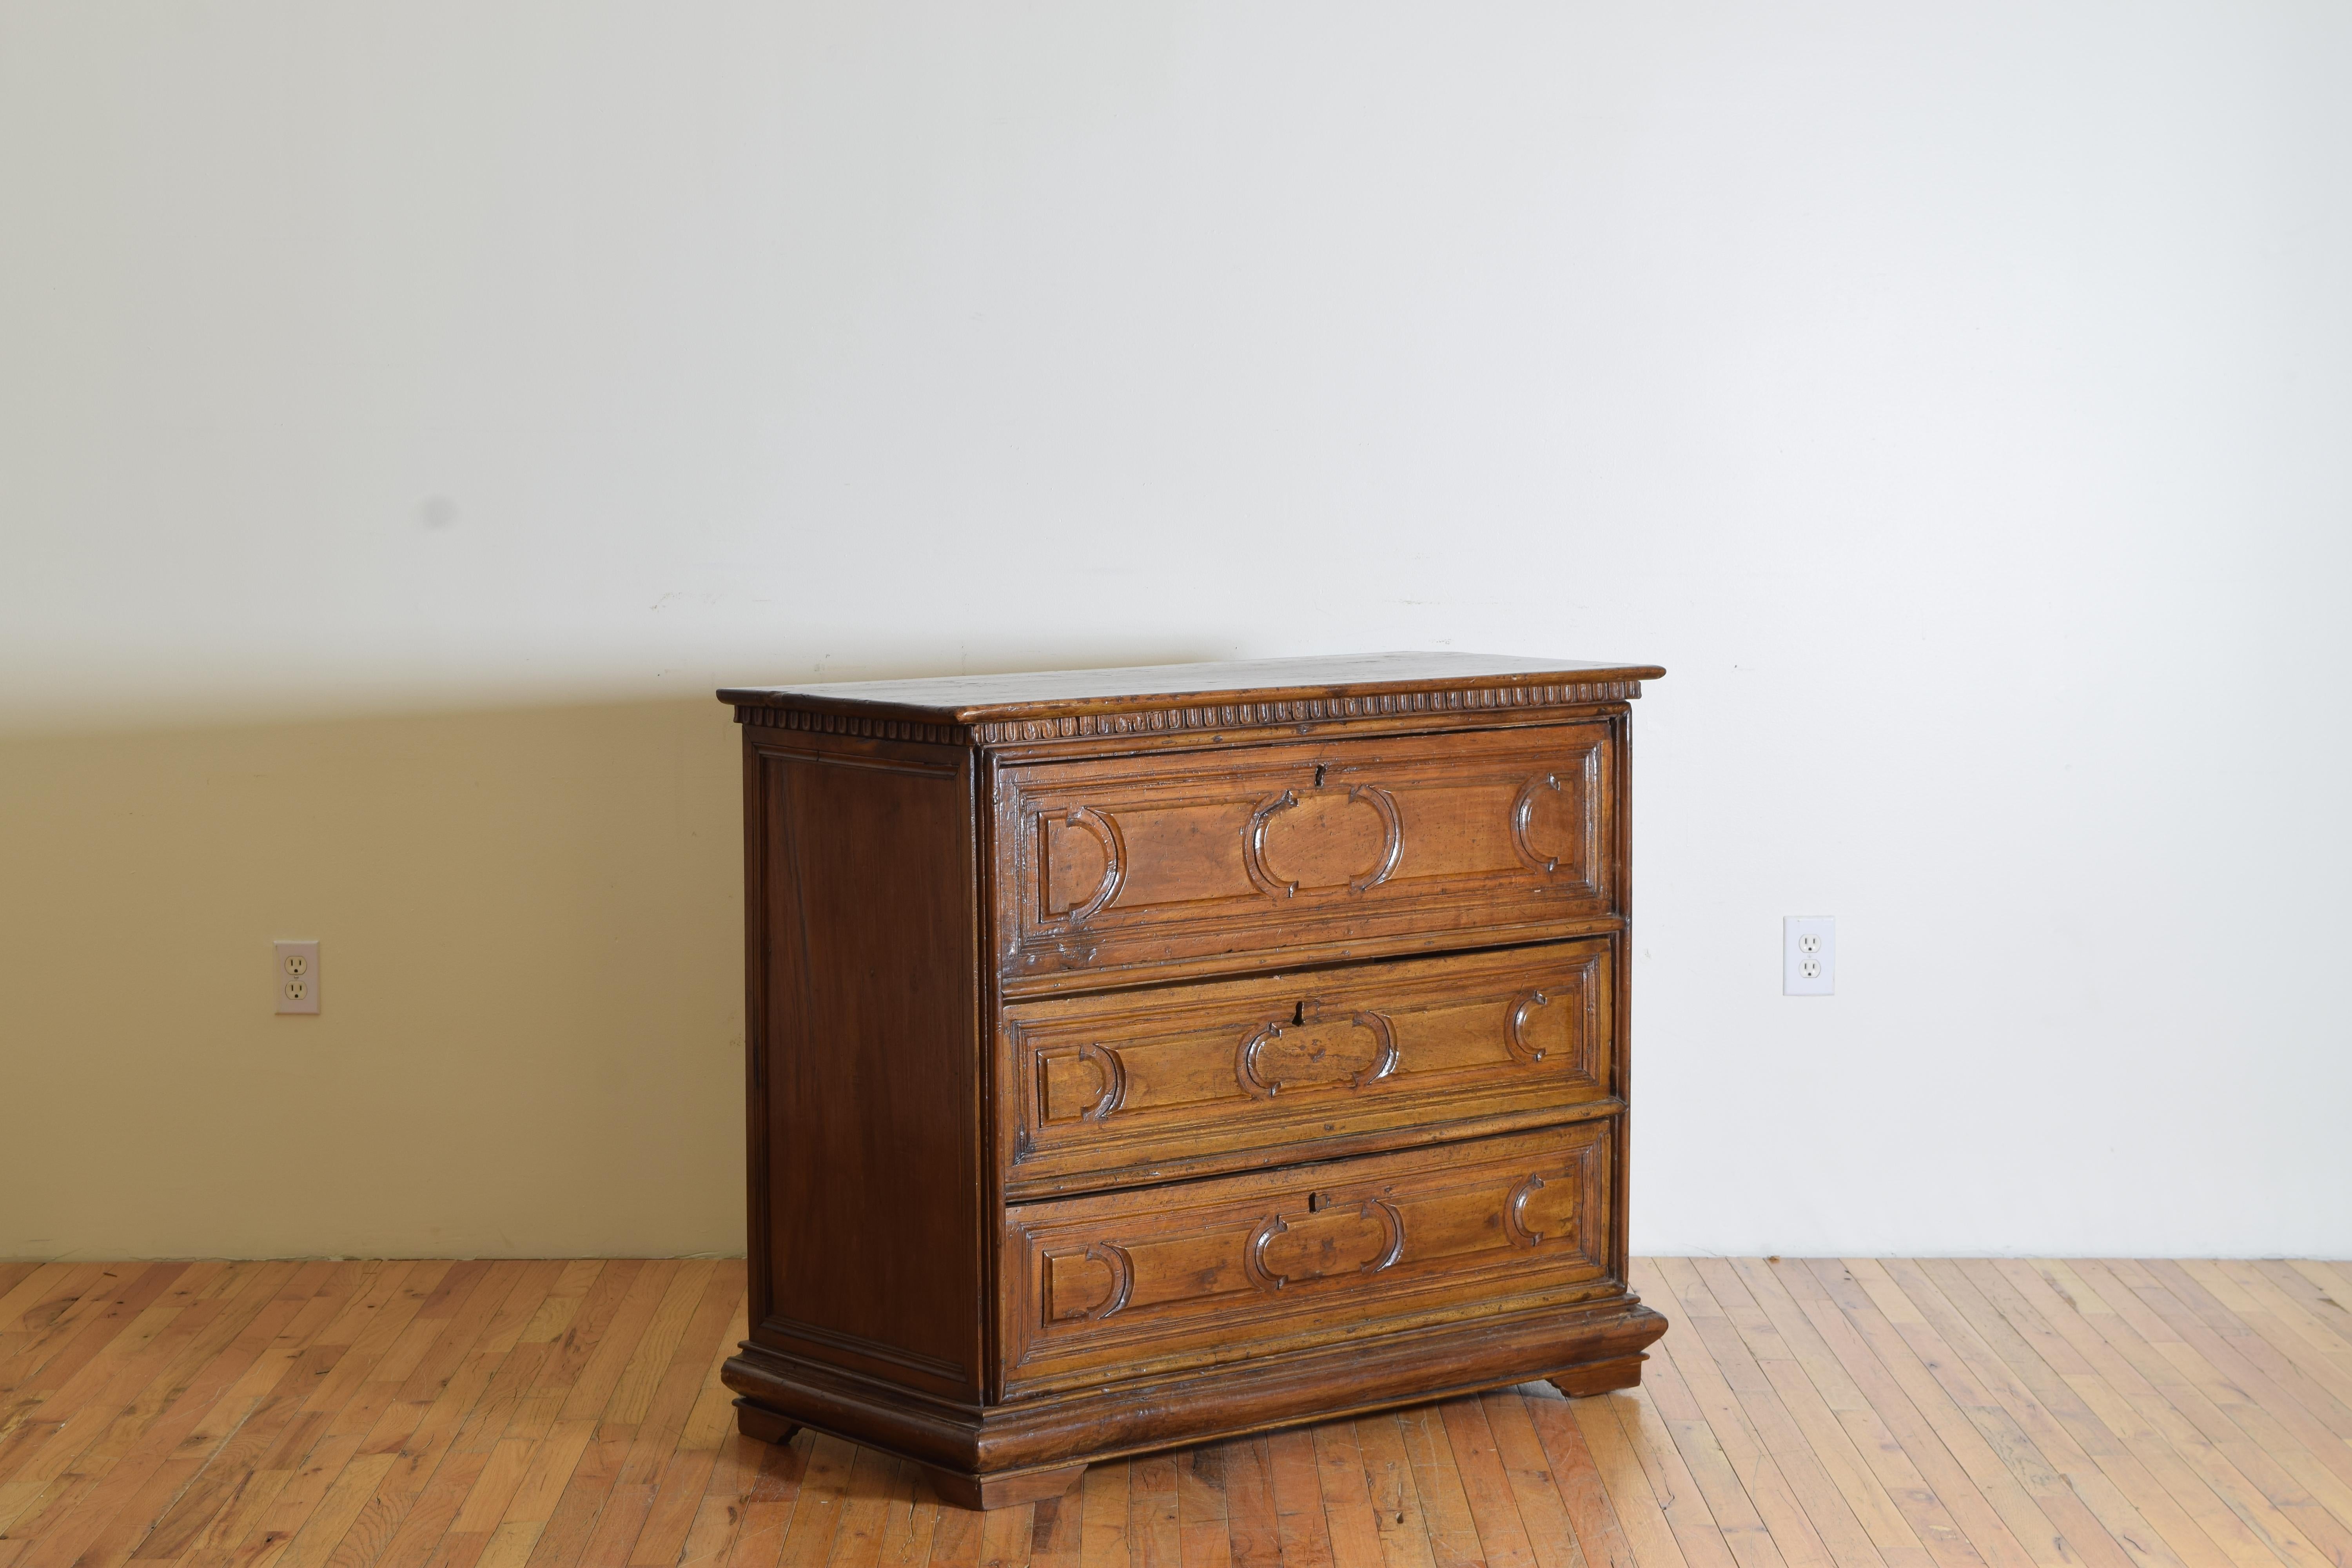 A rectangular top with dentile molding over three drawers having pronounced carved panels on the drawer fronts resting on bracket feet.